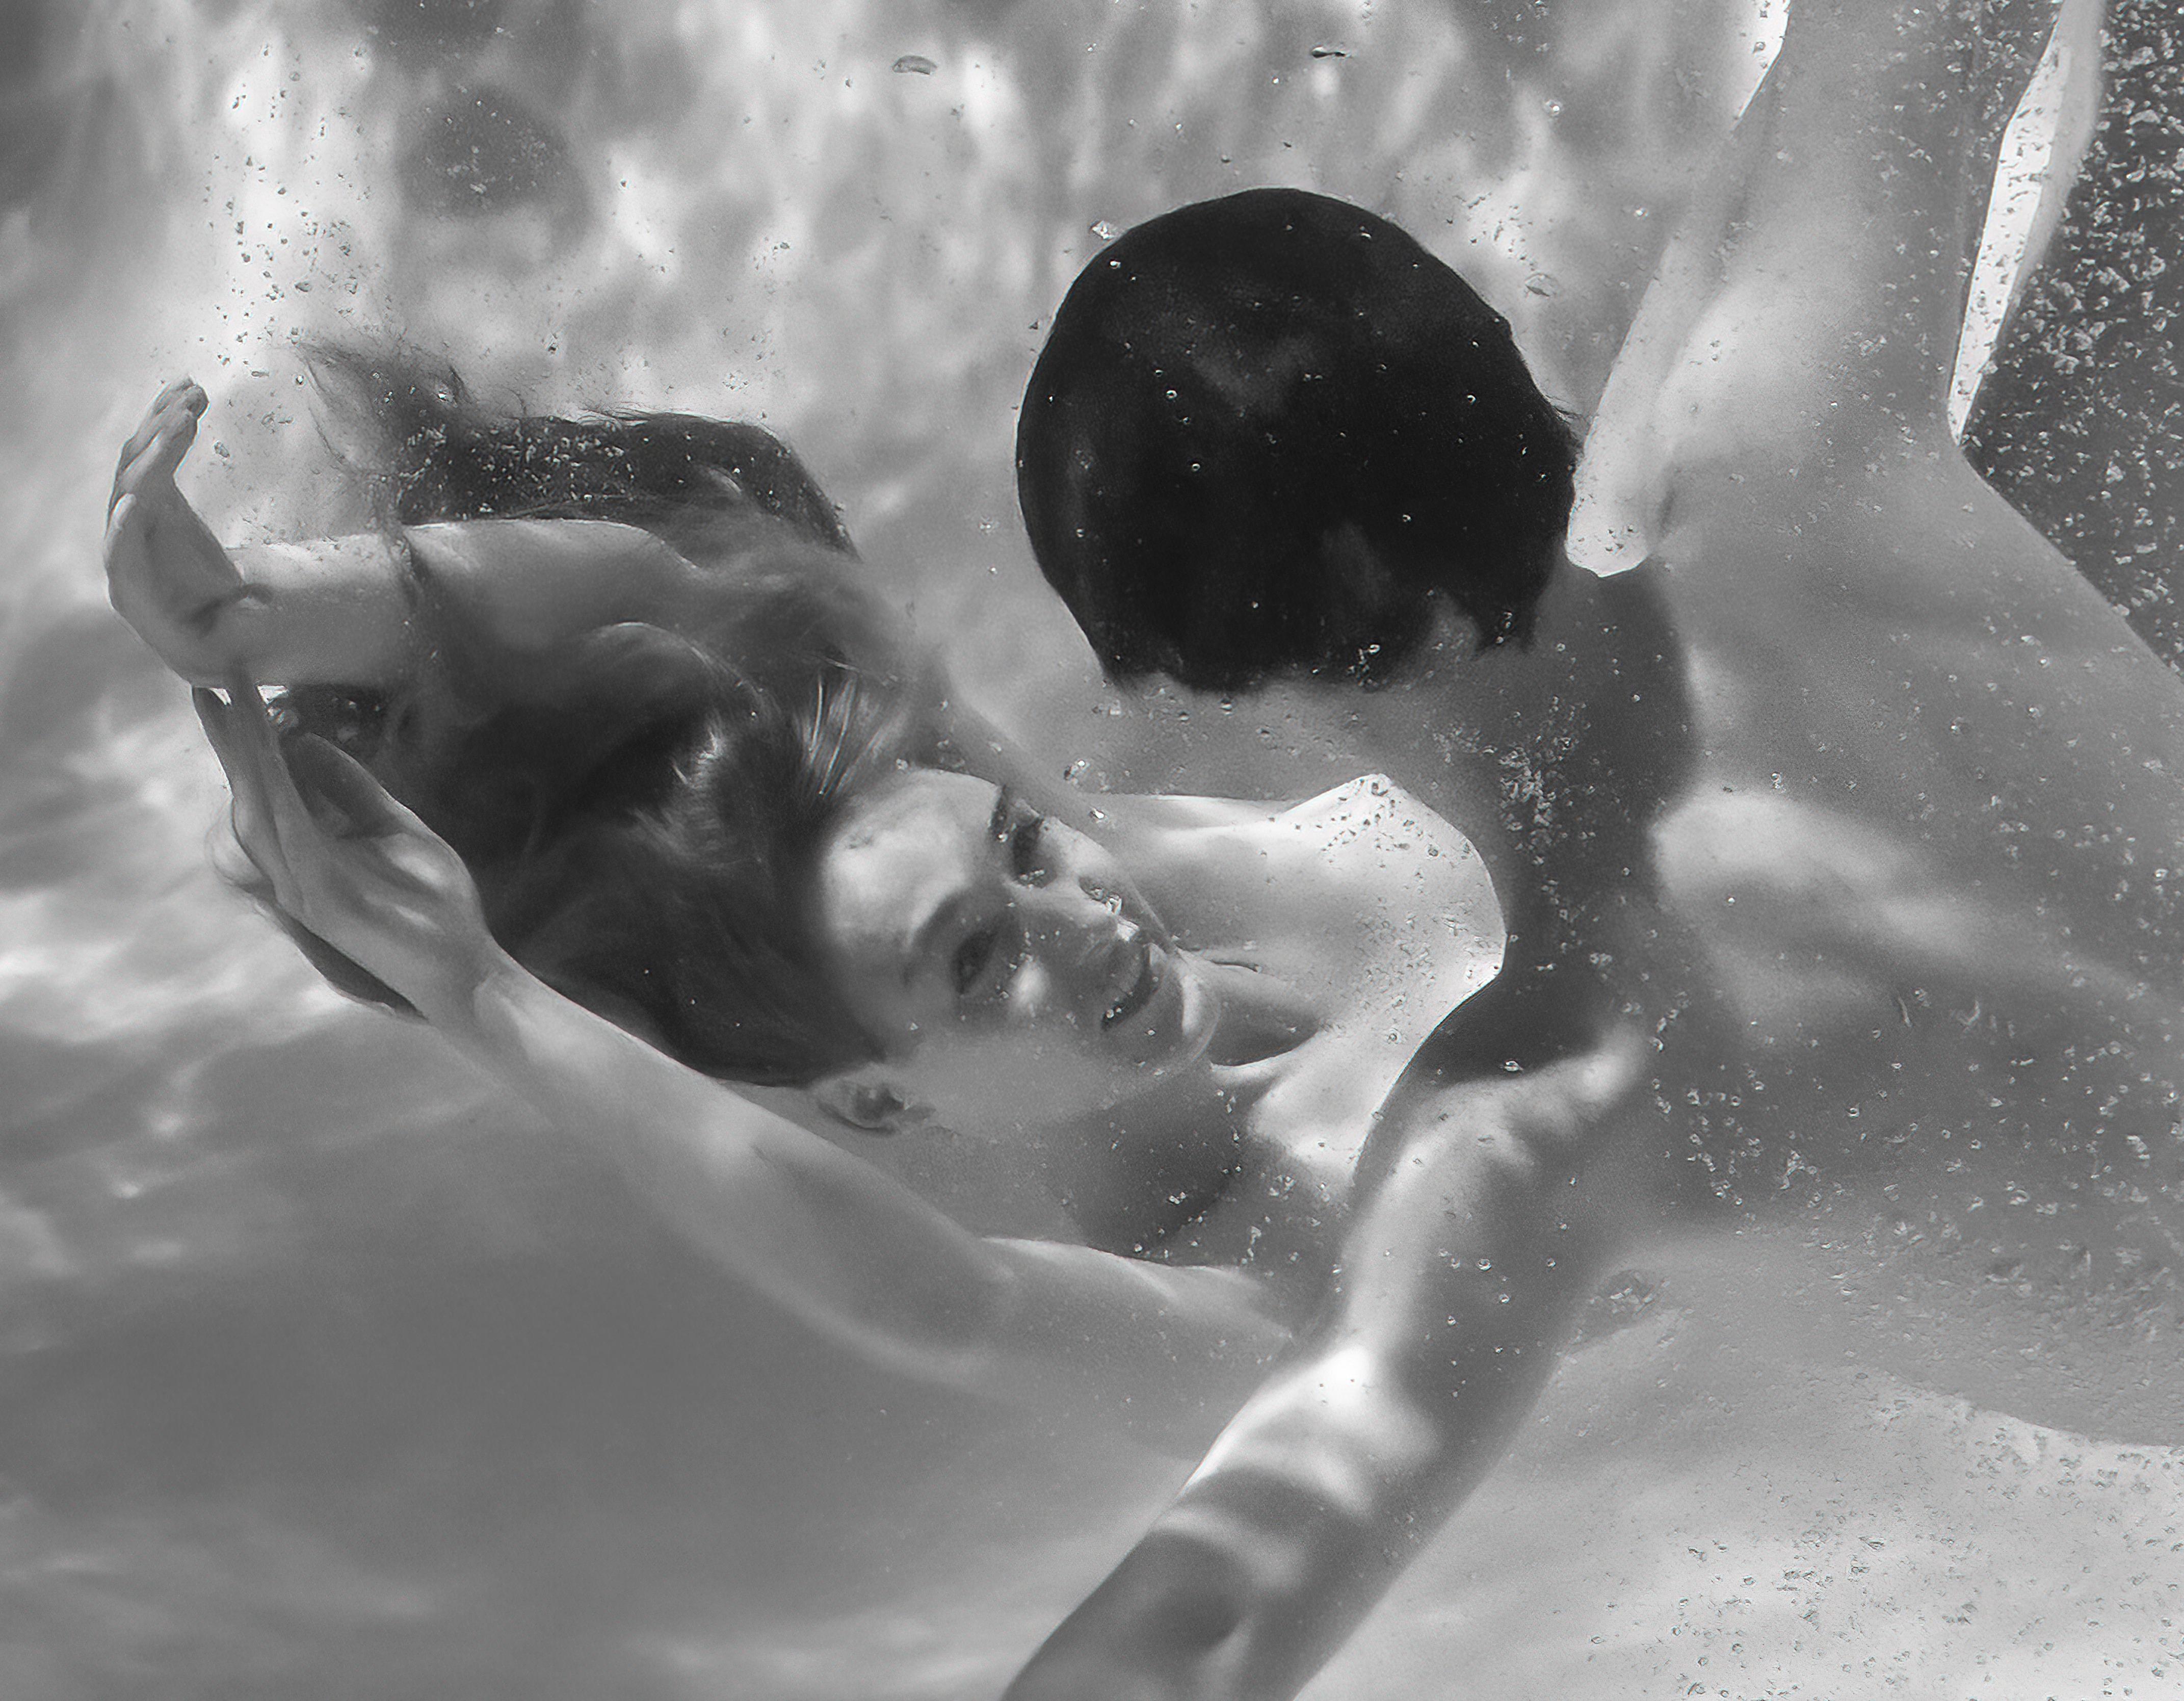 Pool Party VII  - underwater black & white photograph - print on paper 24